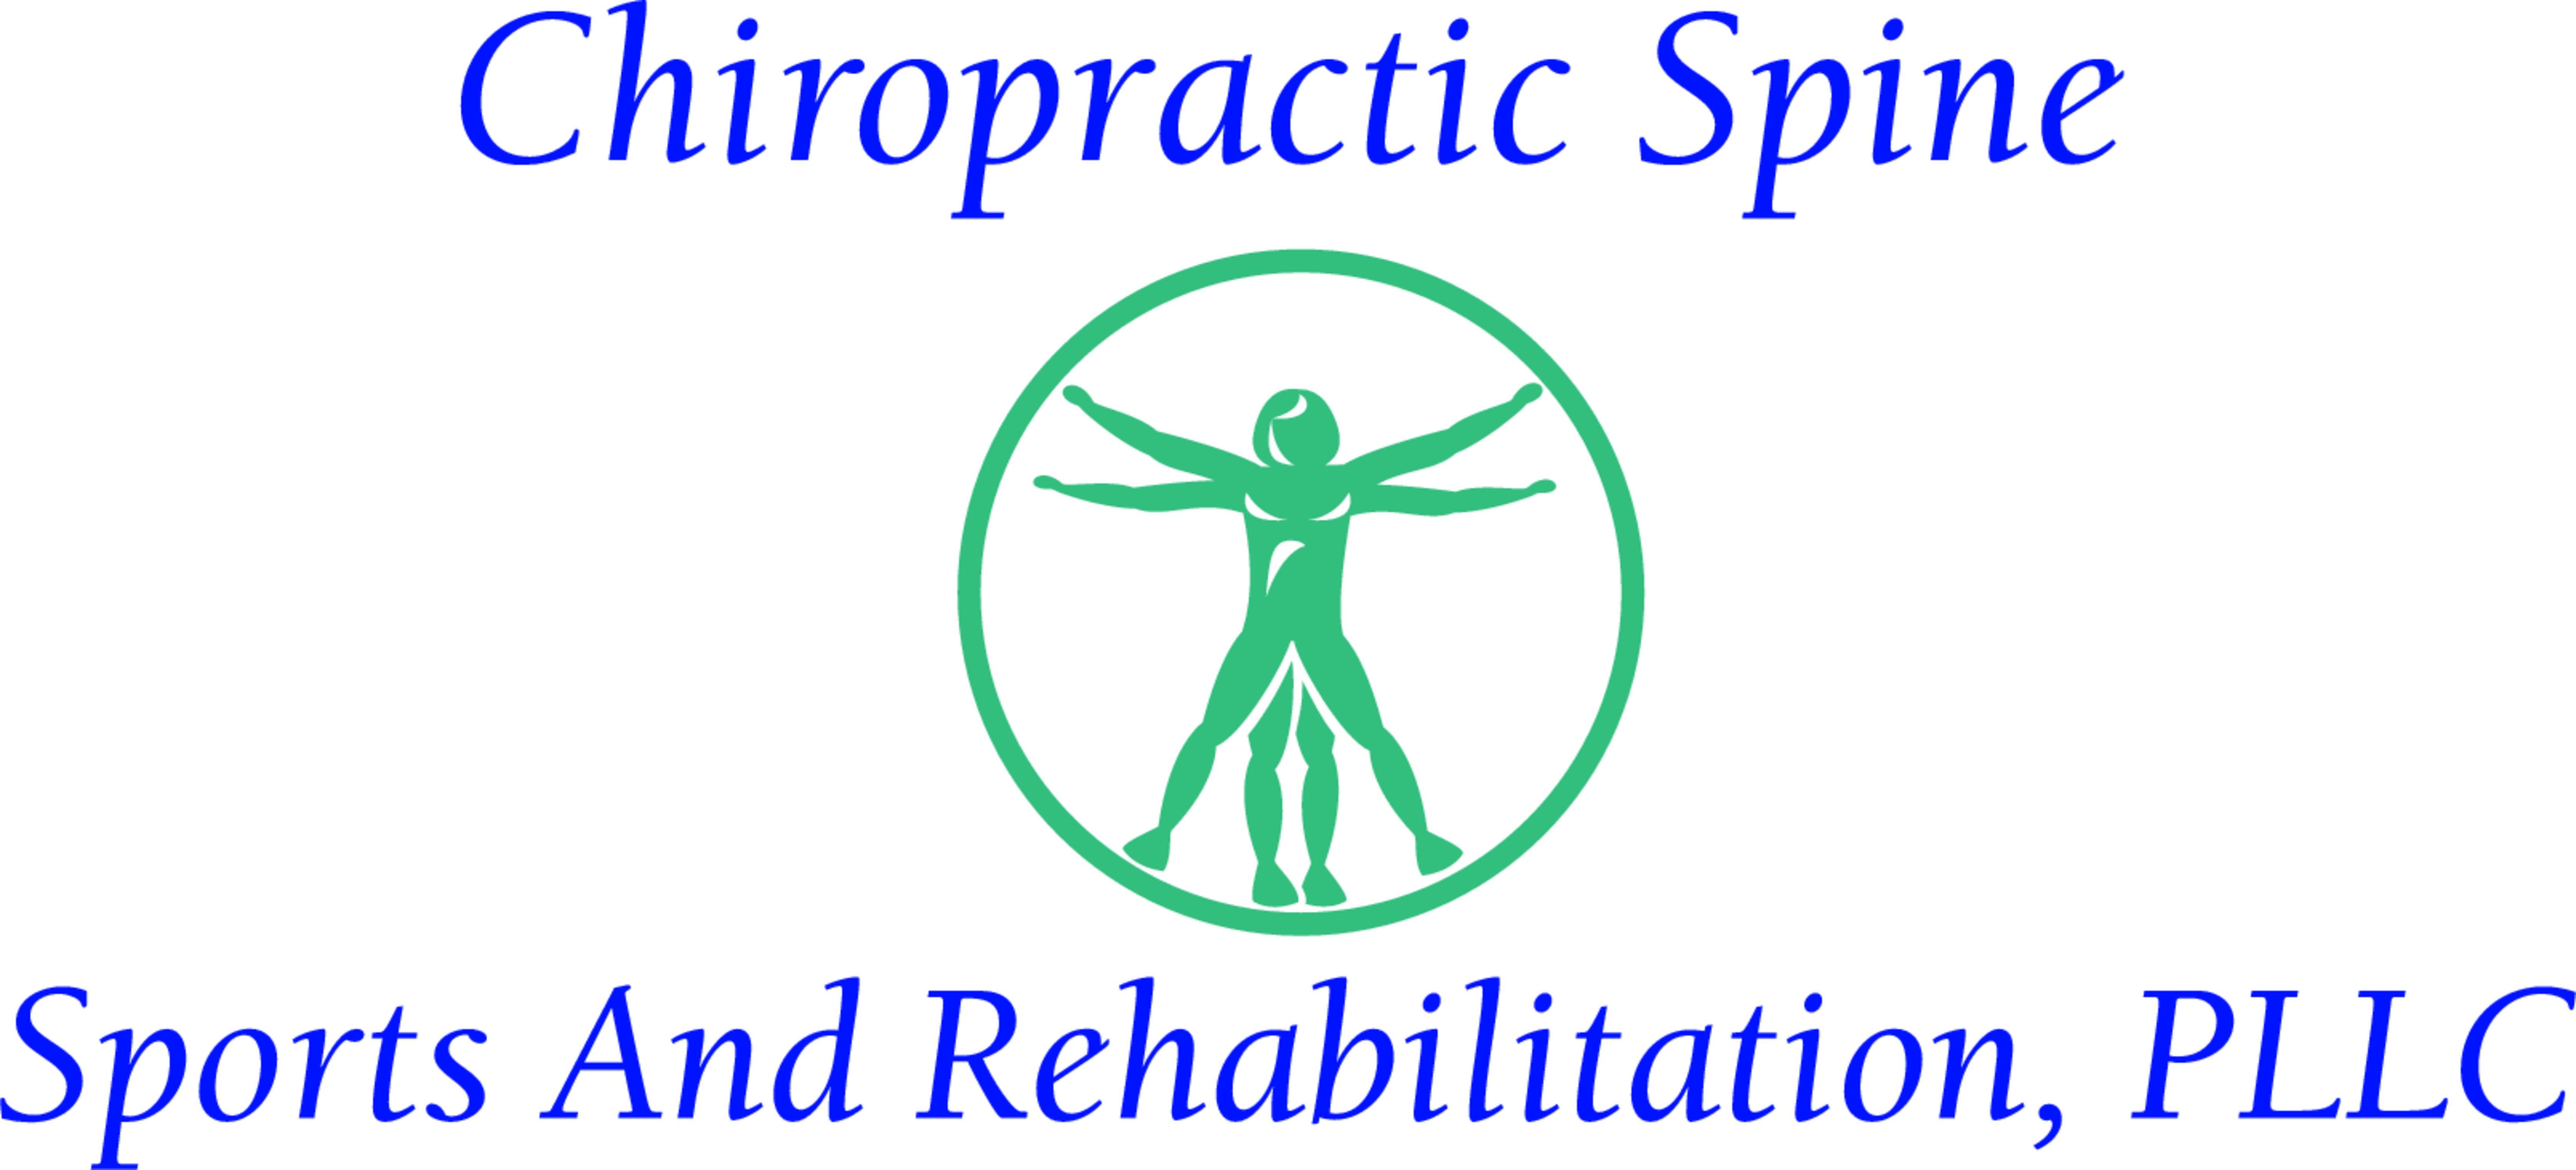 Service: Electrical Stimulation Therapy, Mt Sterling, KY Chiropractor